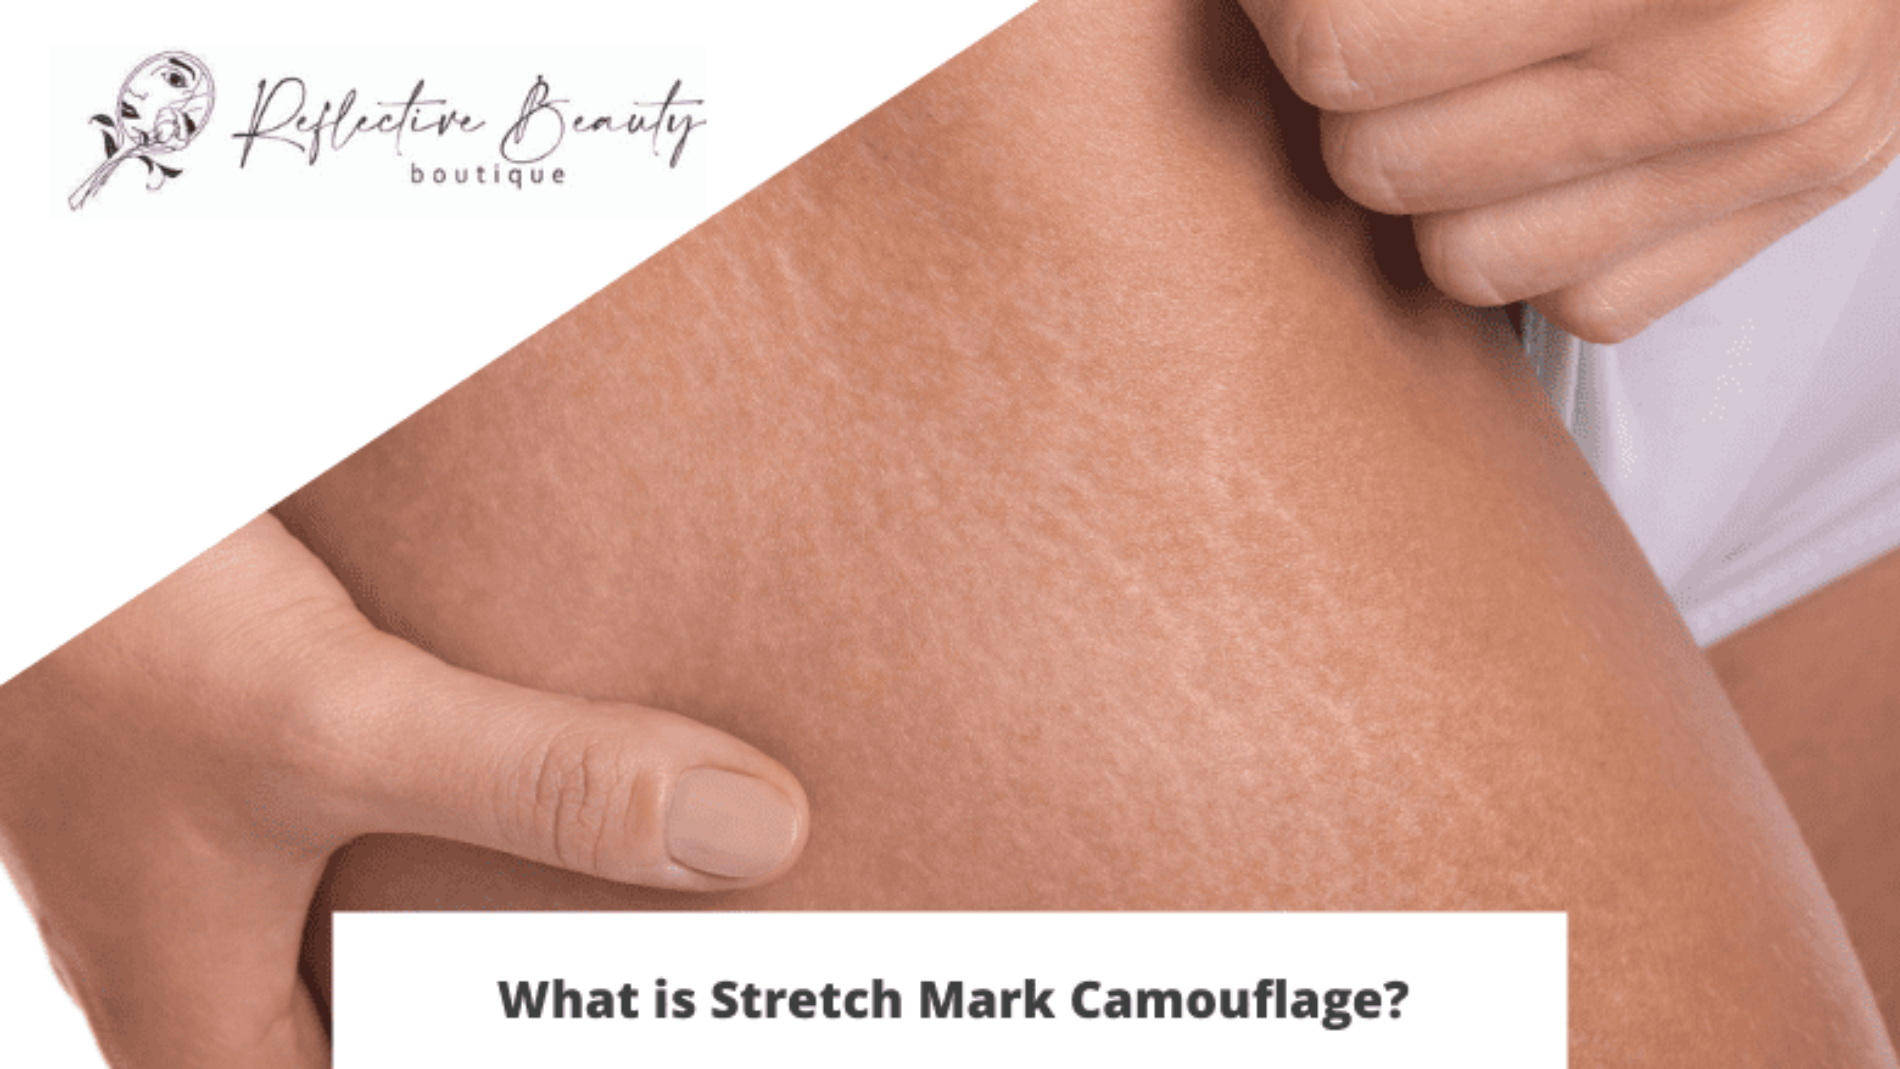 What is stretch mark camouflage